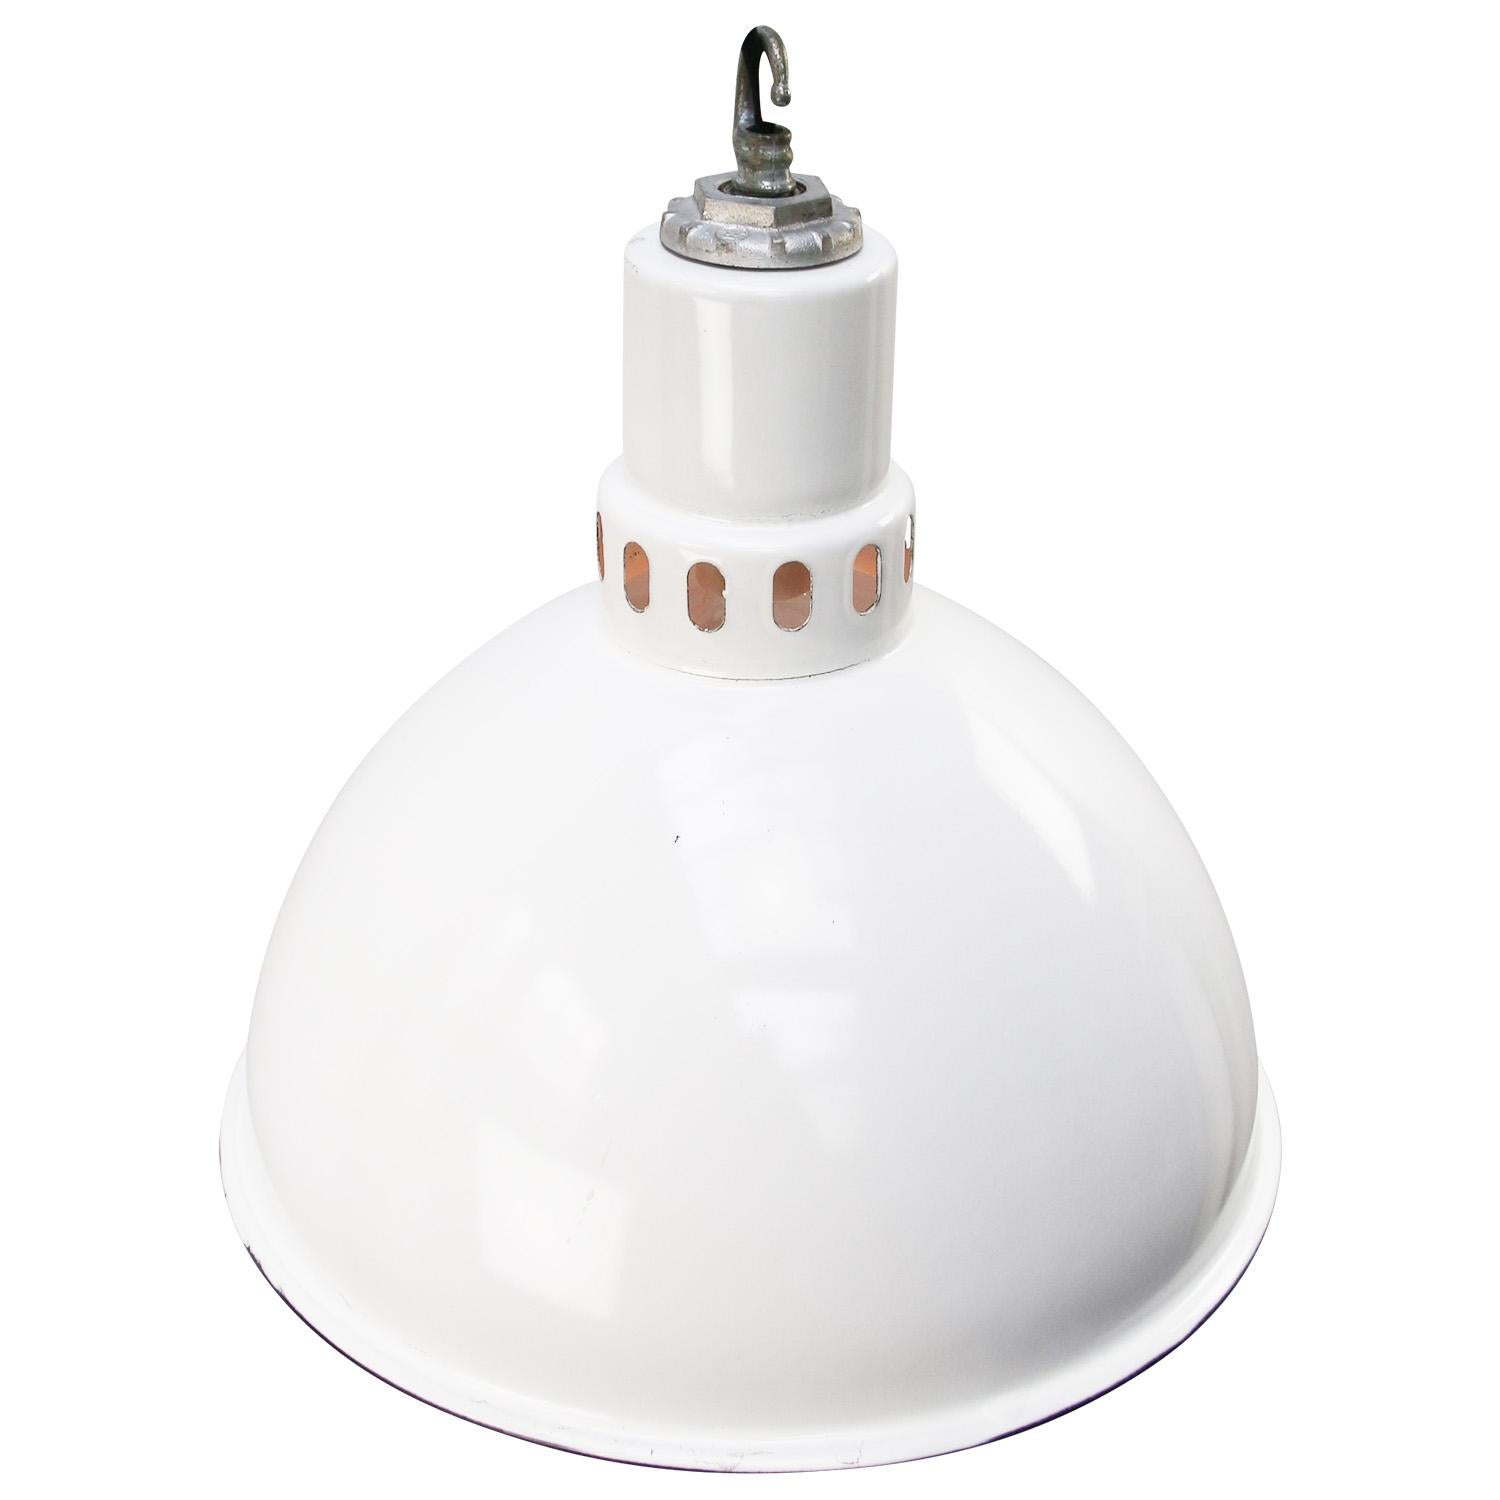 American industrial factory pendant light by Benjamin USA
White enamel, white interior.
Metal top

Weight 2.50 kg / 5.5 lb

Priced per individual item. All lamps have been made suitable by international standards for incandescent light bulbs,